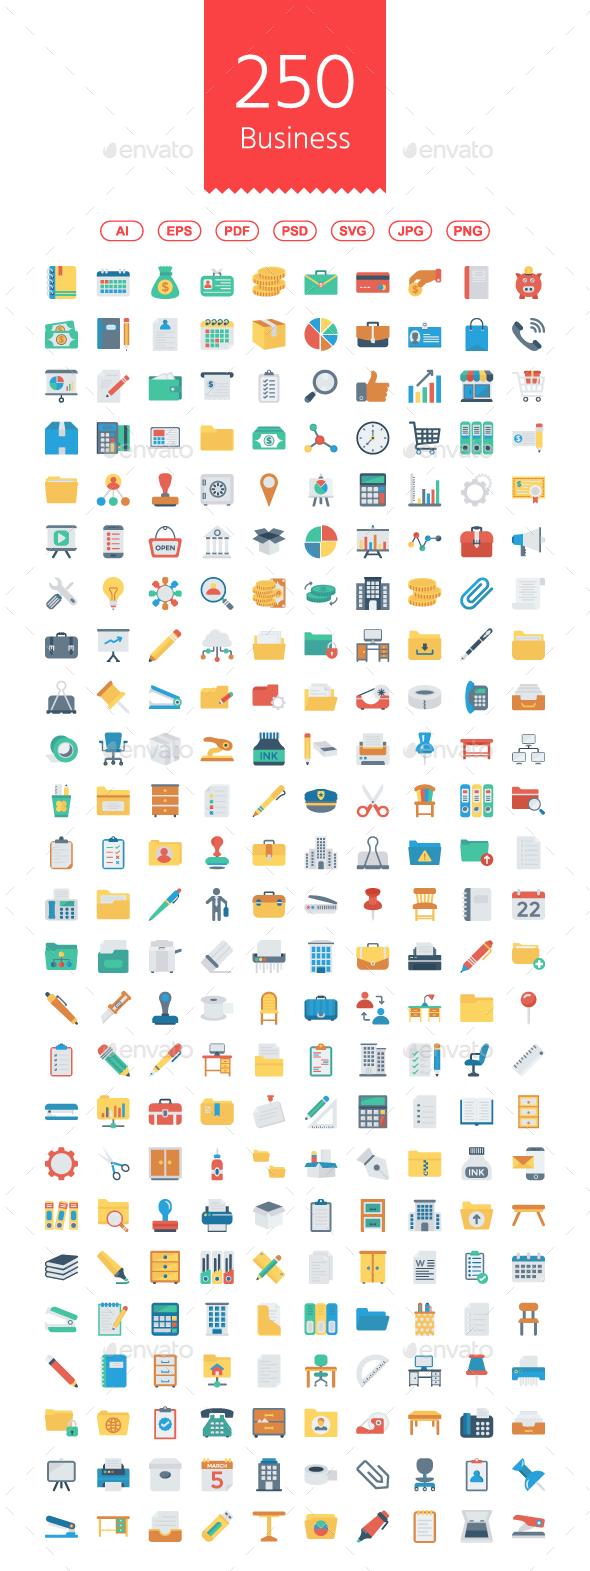 Busines and Office Flat icons